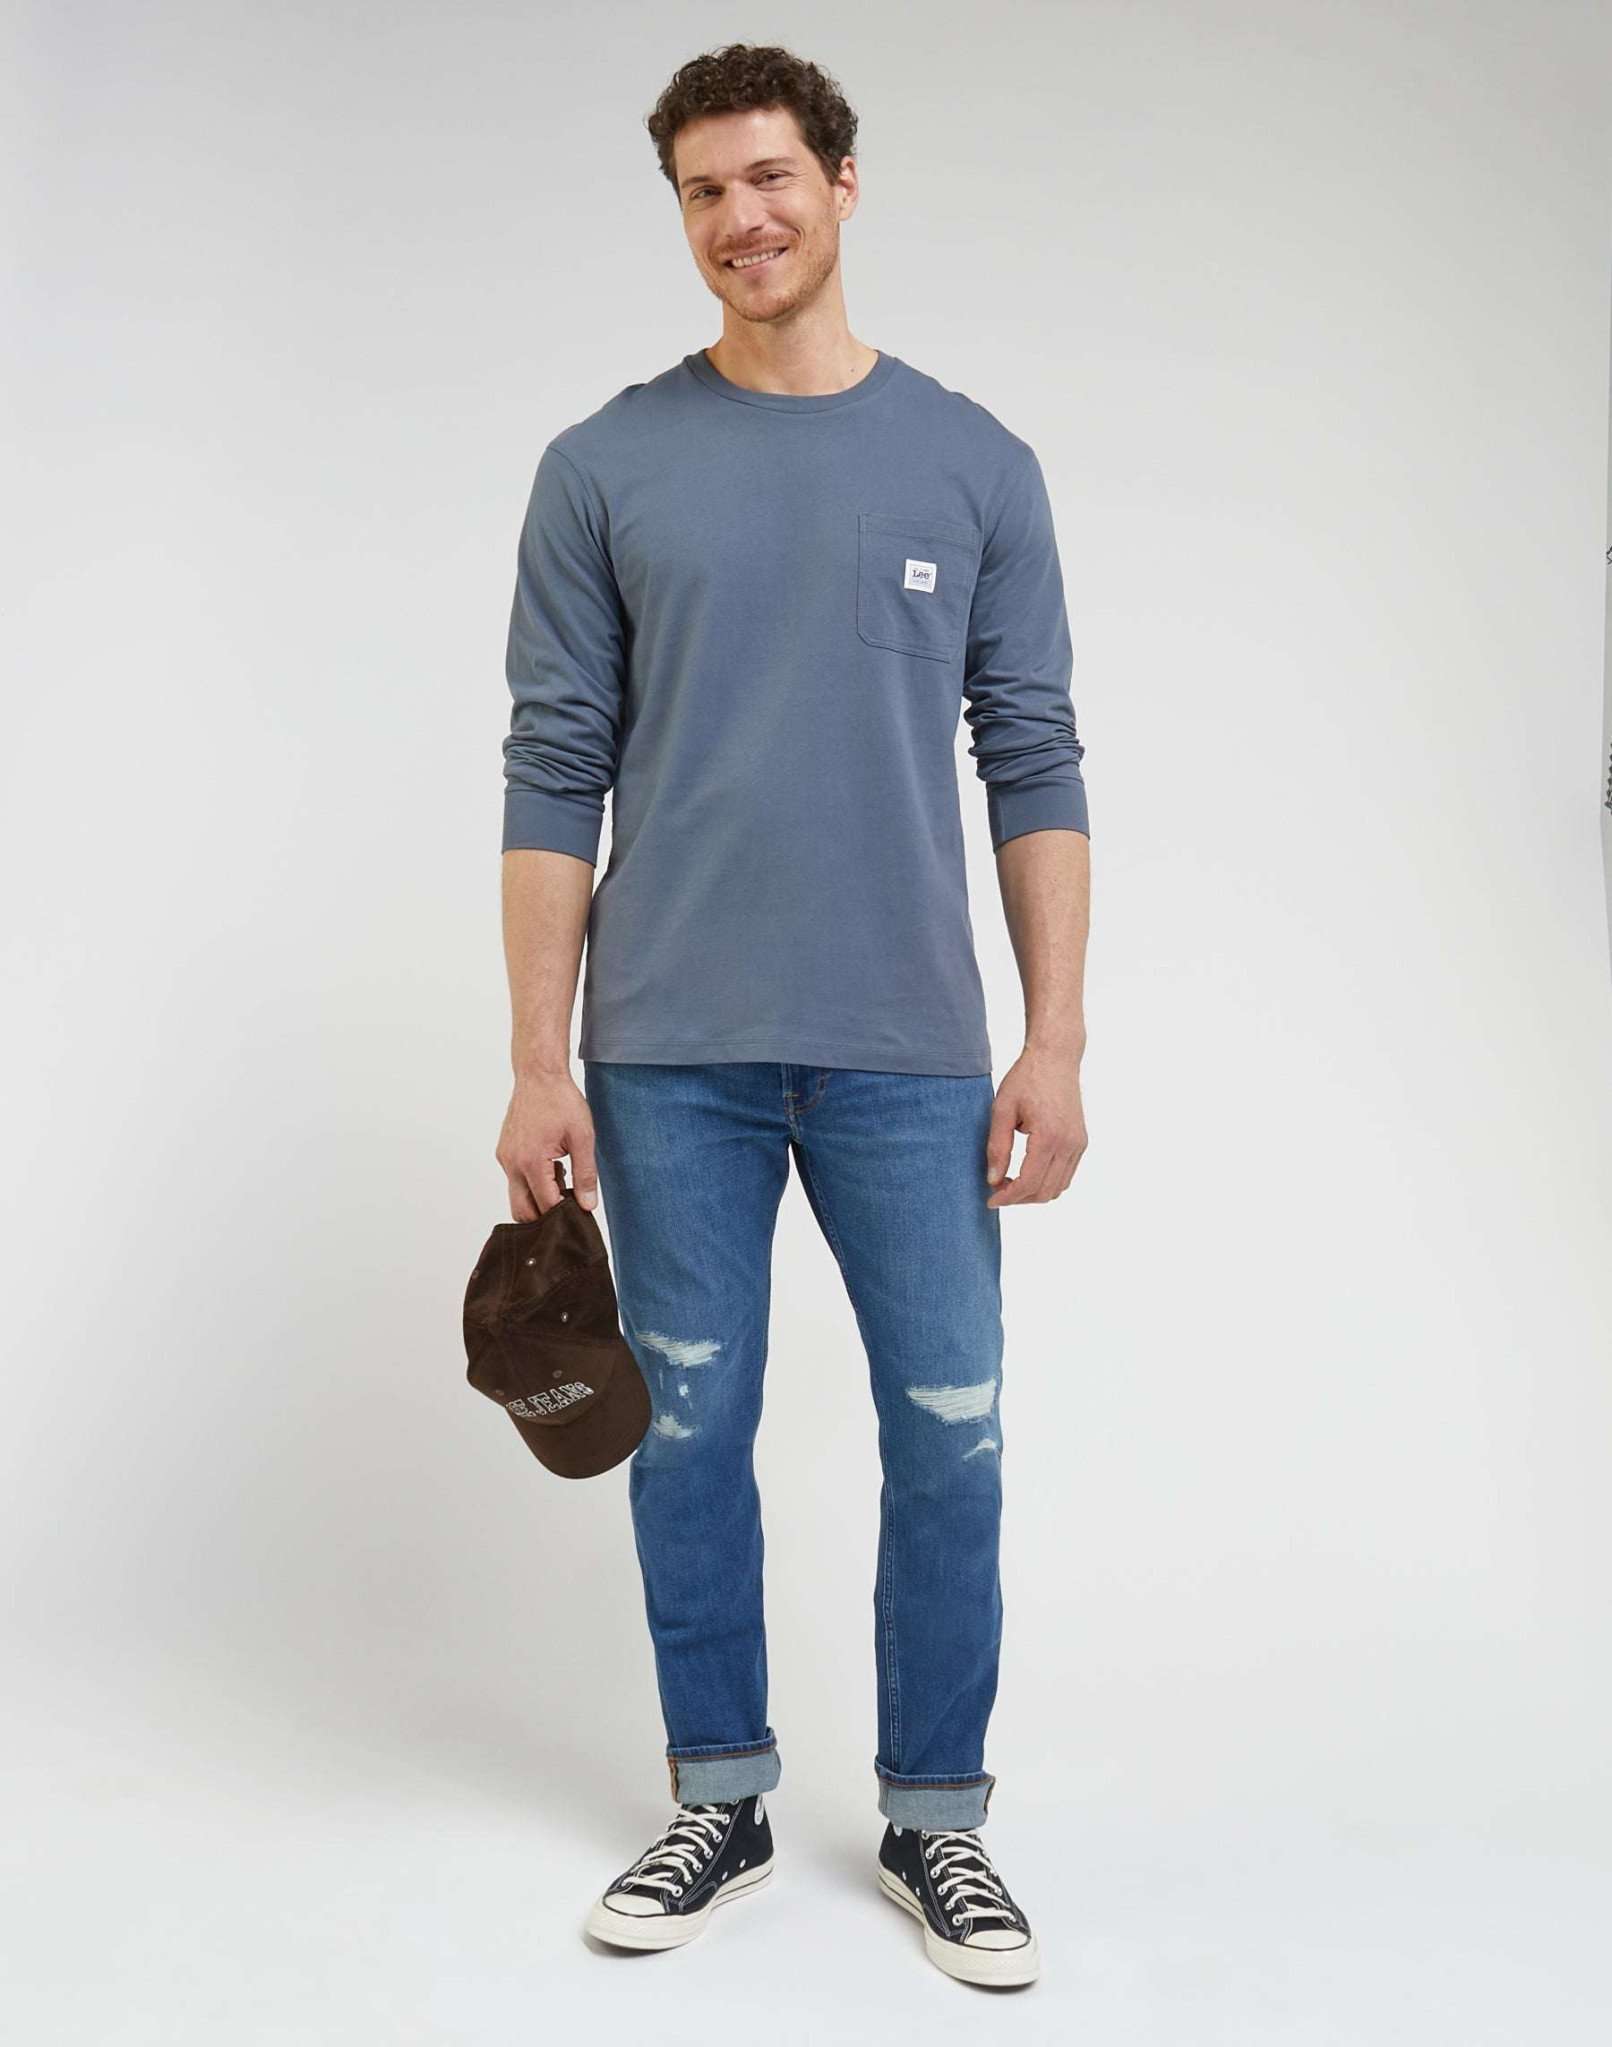 LS Ww Pocket Tee in Taint Grey Pullover Lee   